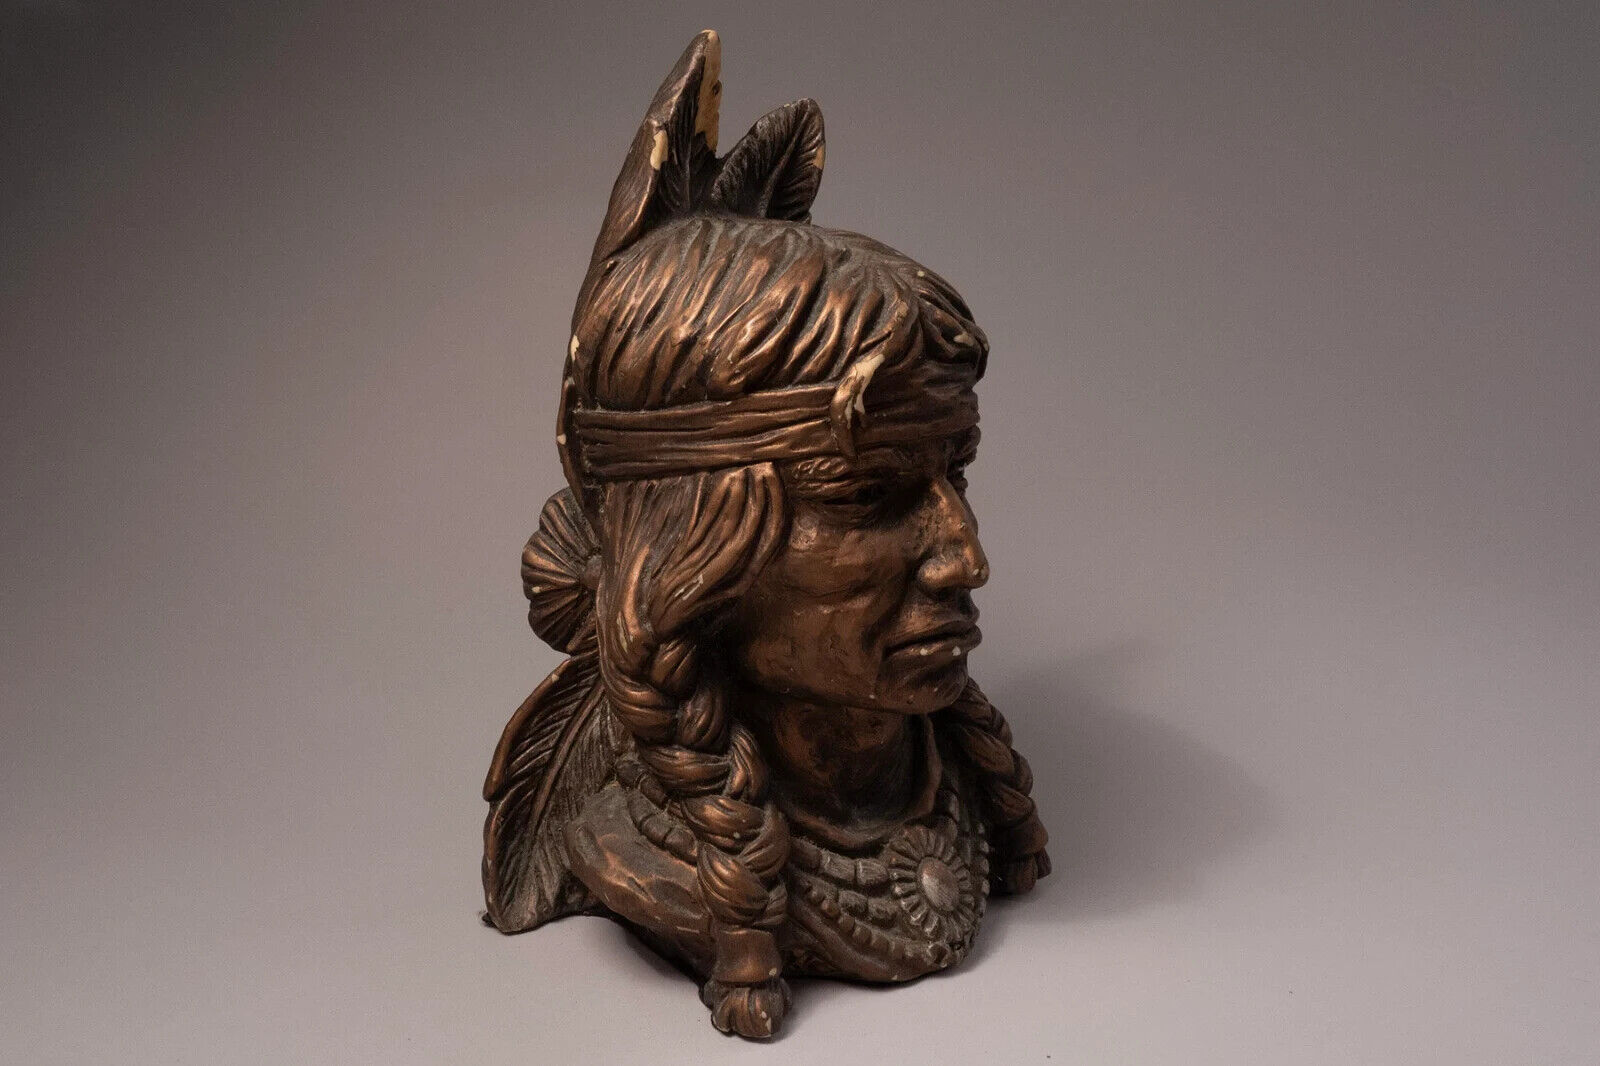 Native American Bust - 1966. Universal Statuary Corp. Antique and original.